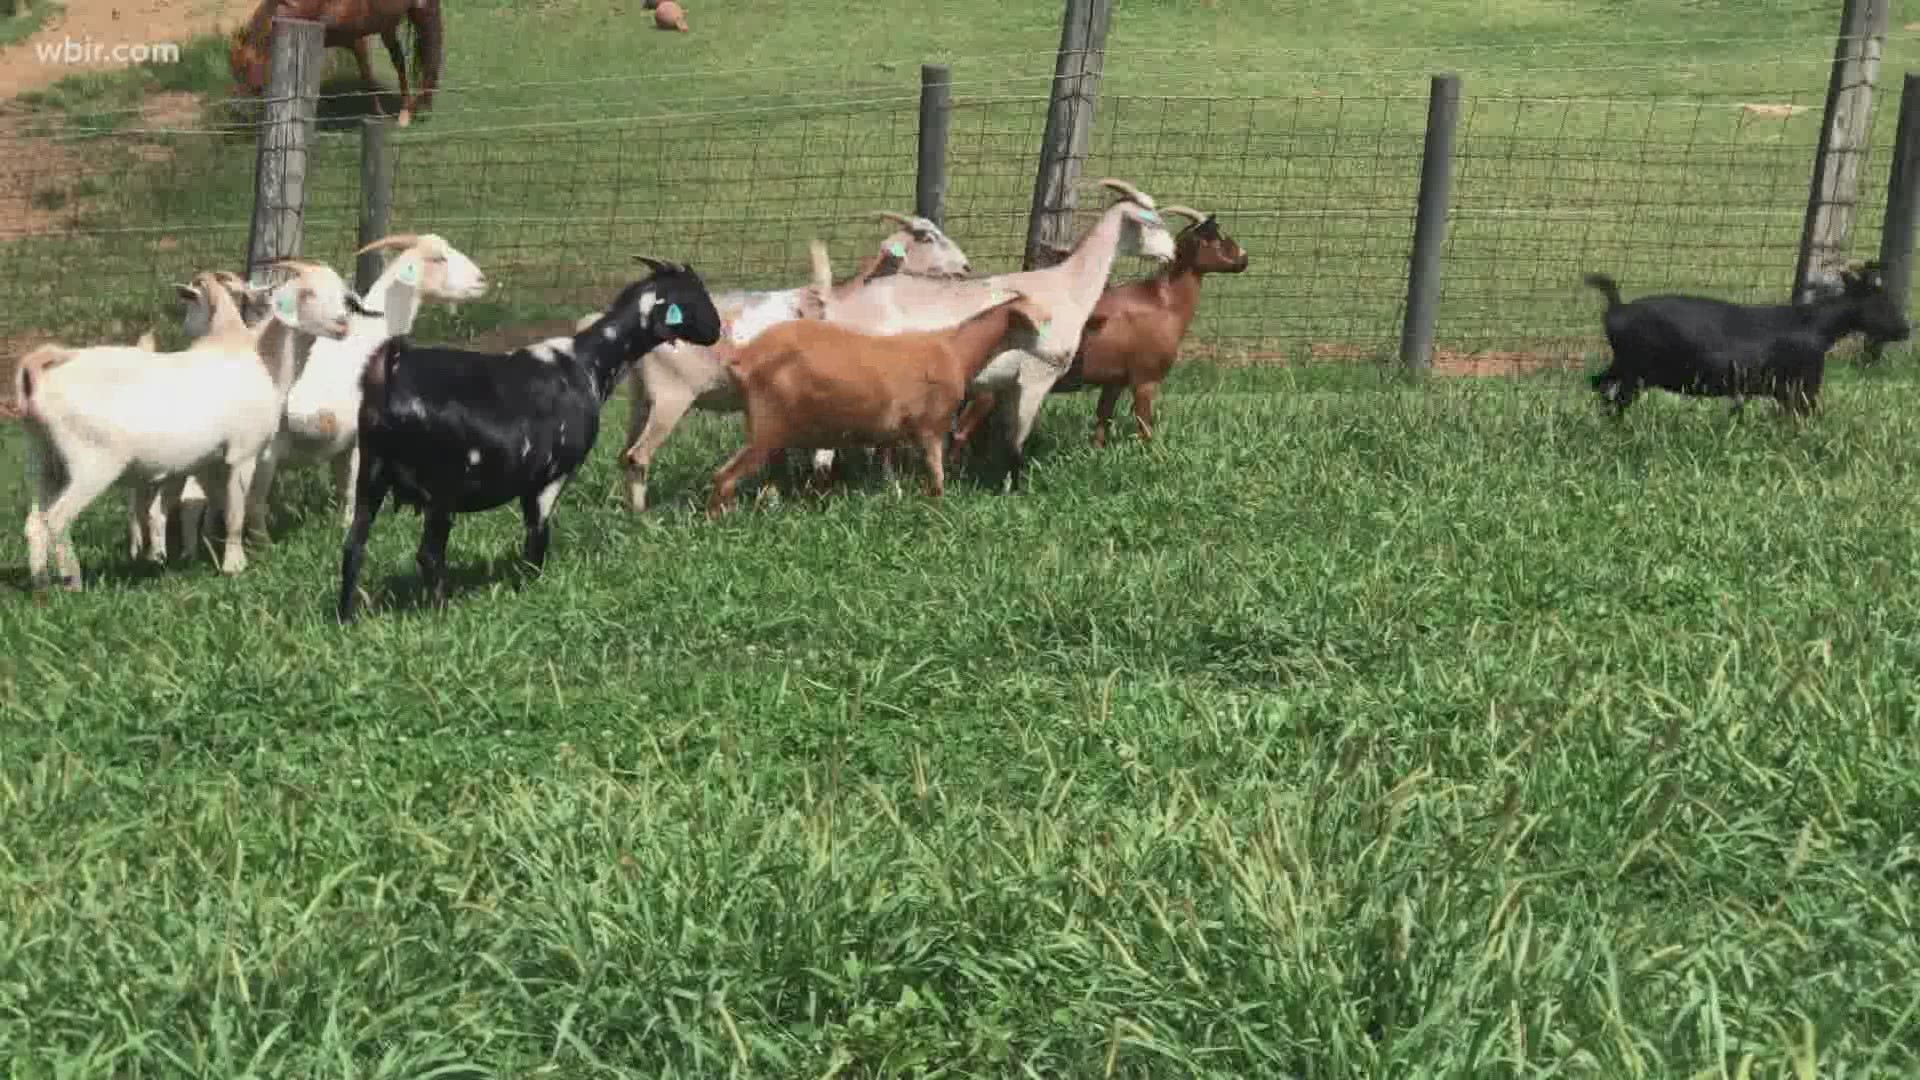 Lew Strickland, the extension veterinarian at the University of Tennessee explains propercare for goats. Sept. 1, 2020-4pm.